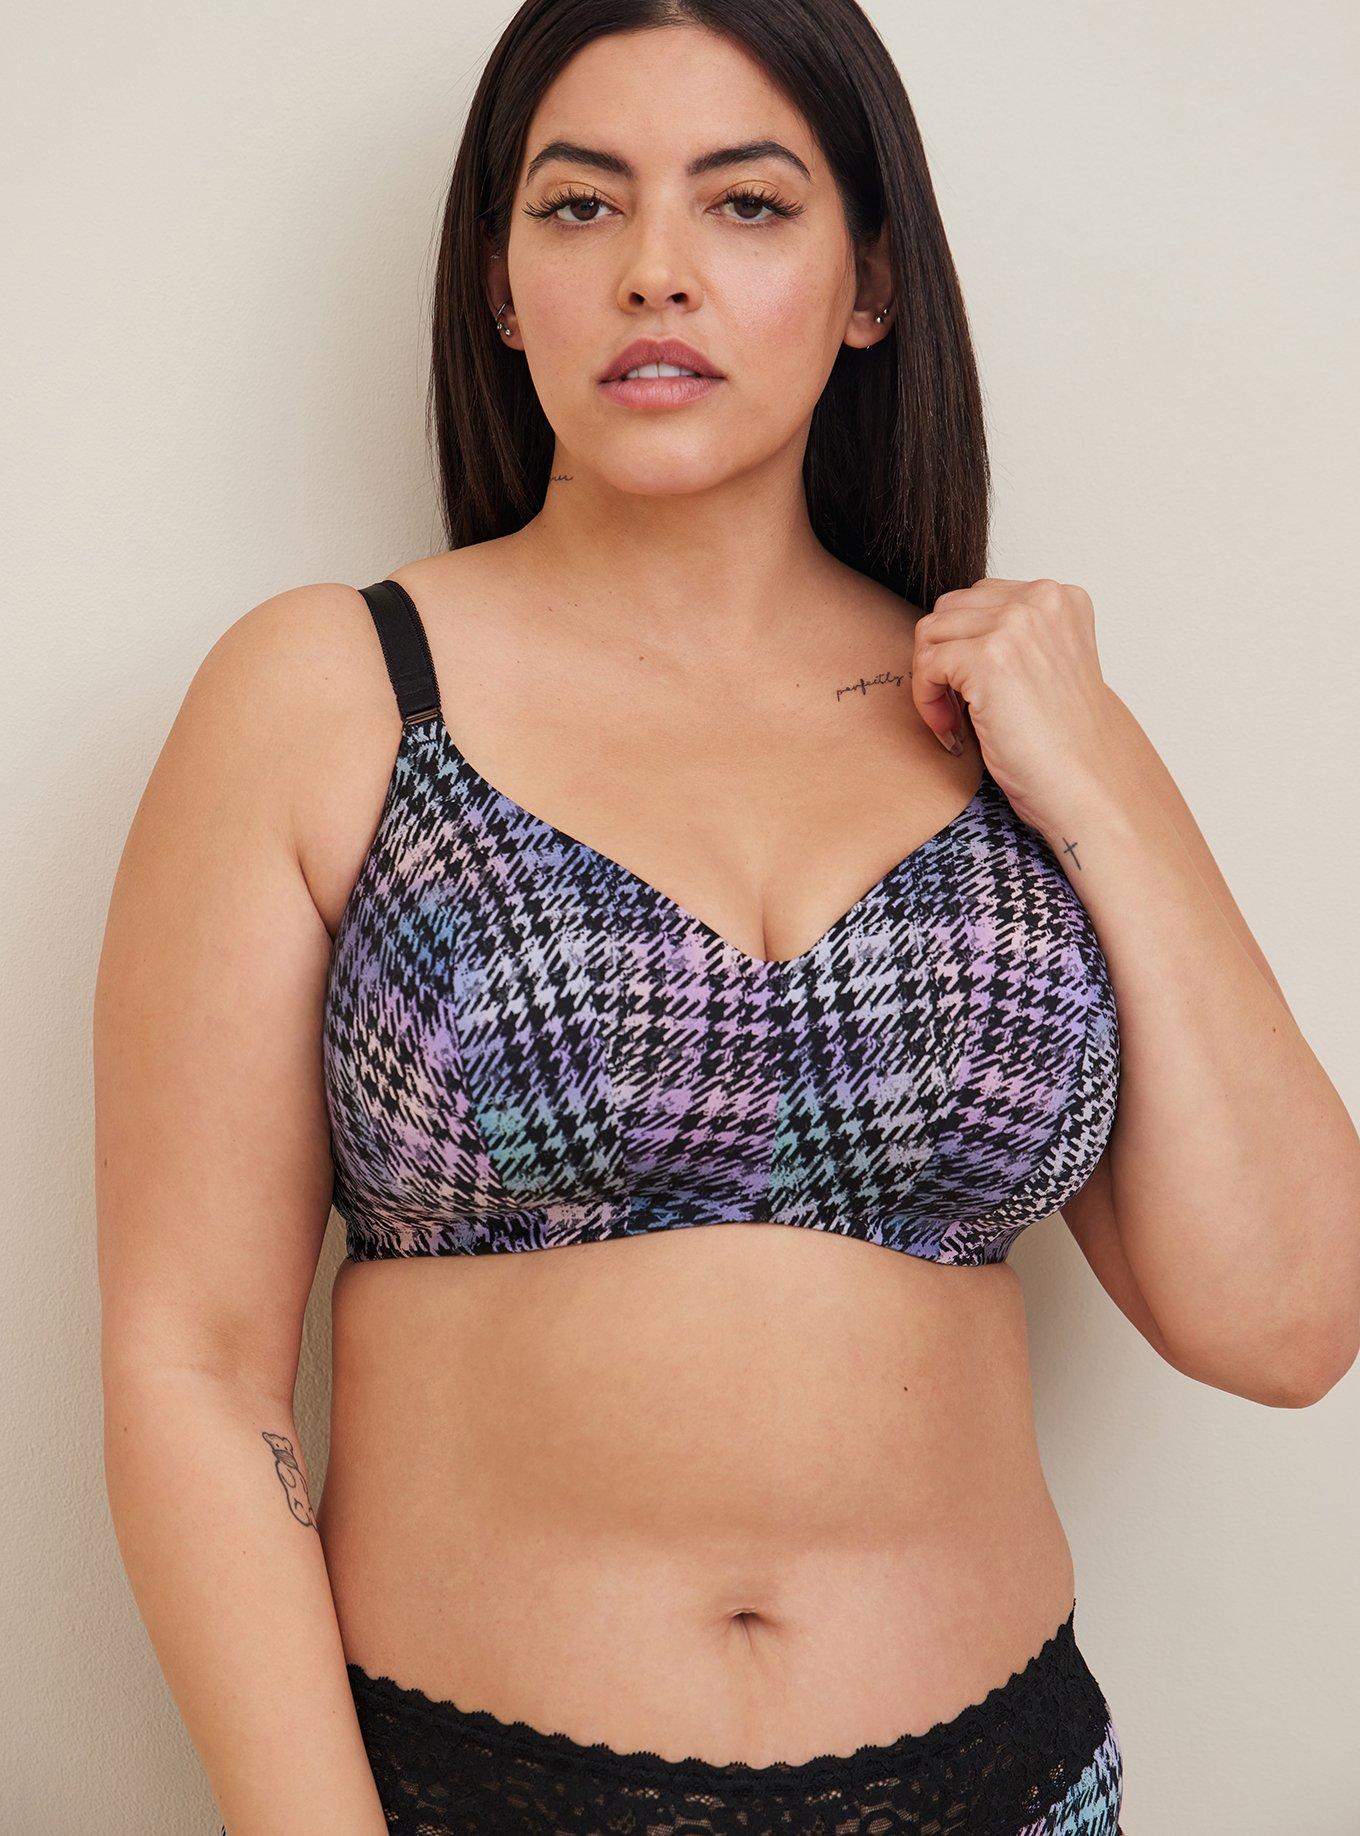 Bras I Hate & Love: A Conversion Guide for Ordering Bras From Simply Be's US  Site